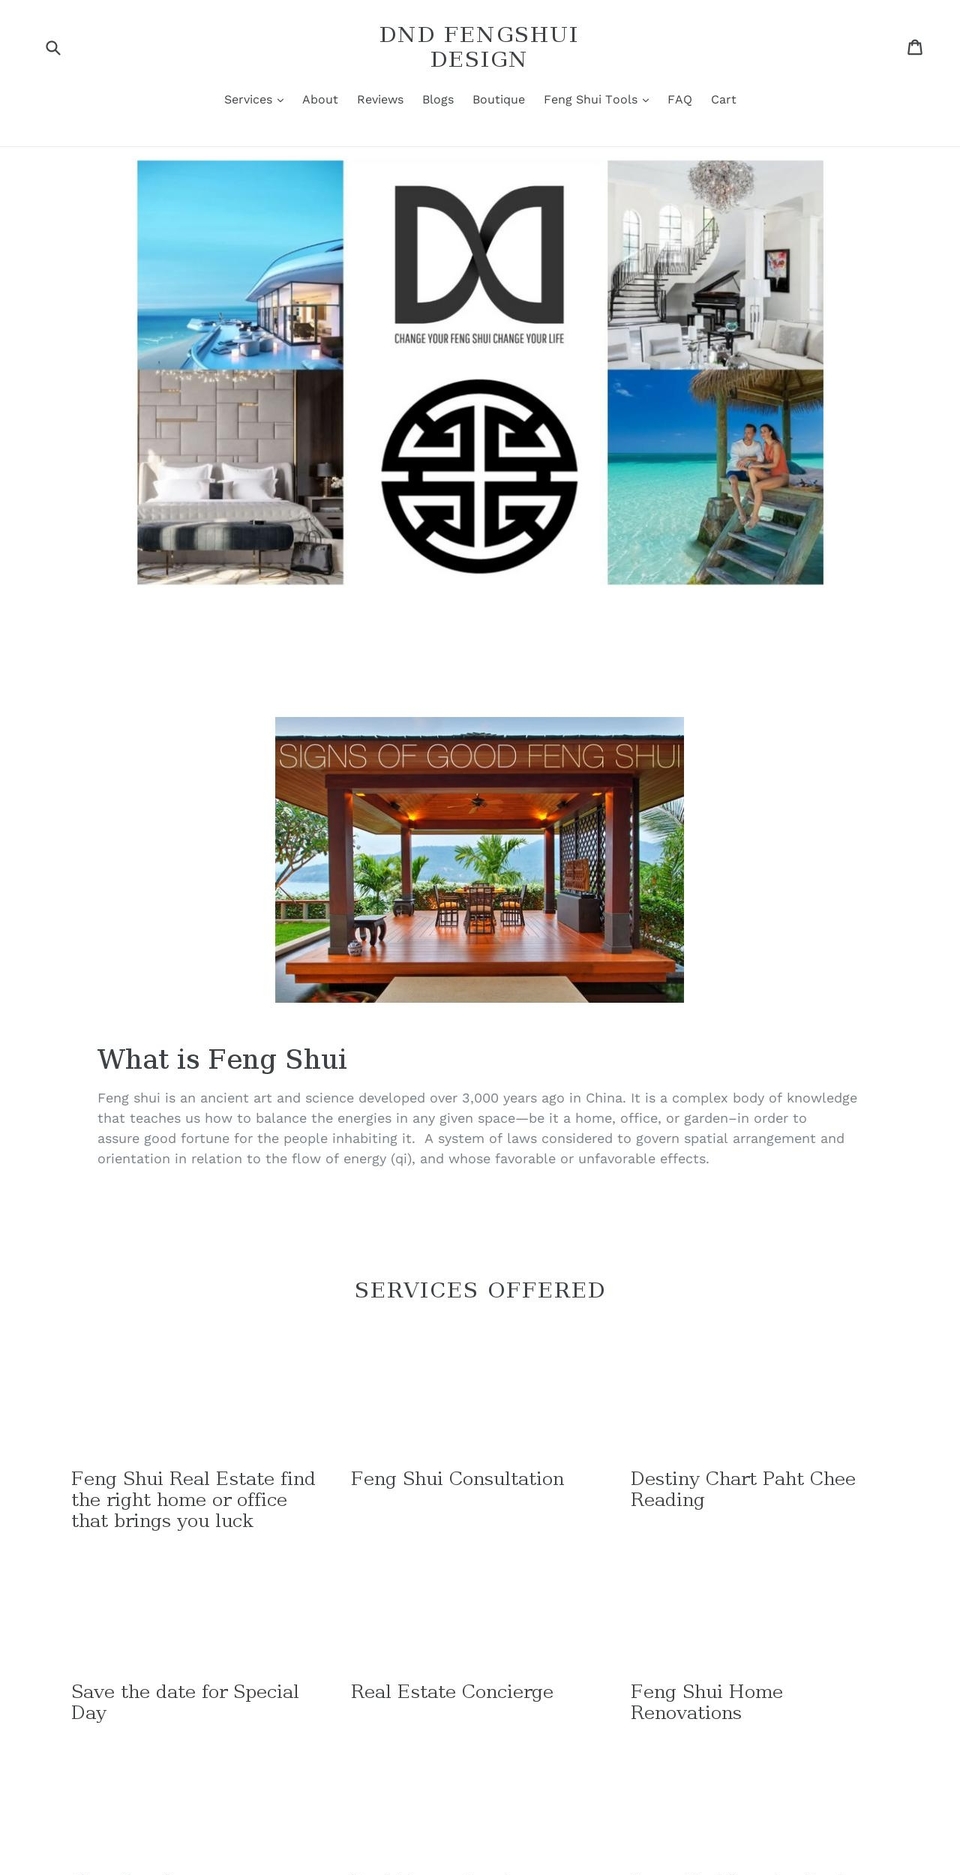 boutique Shopify theme site example dndfengshui.com